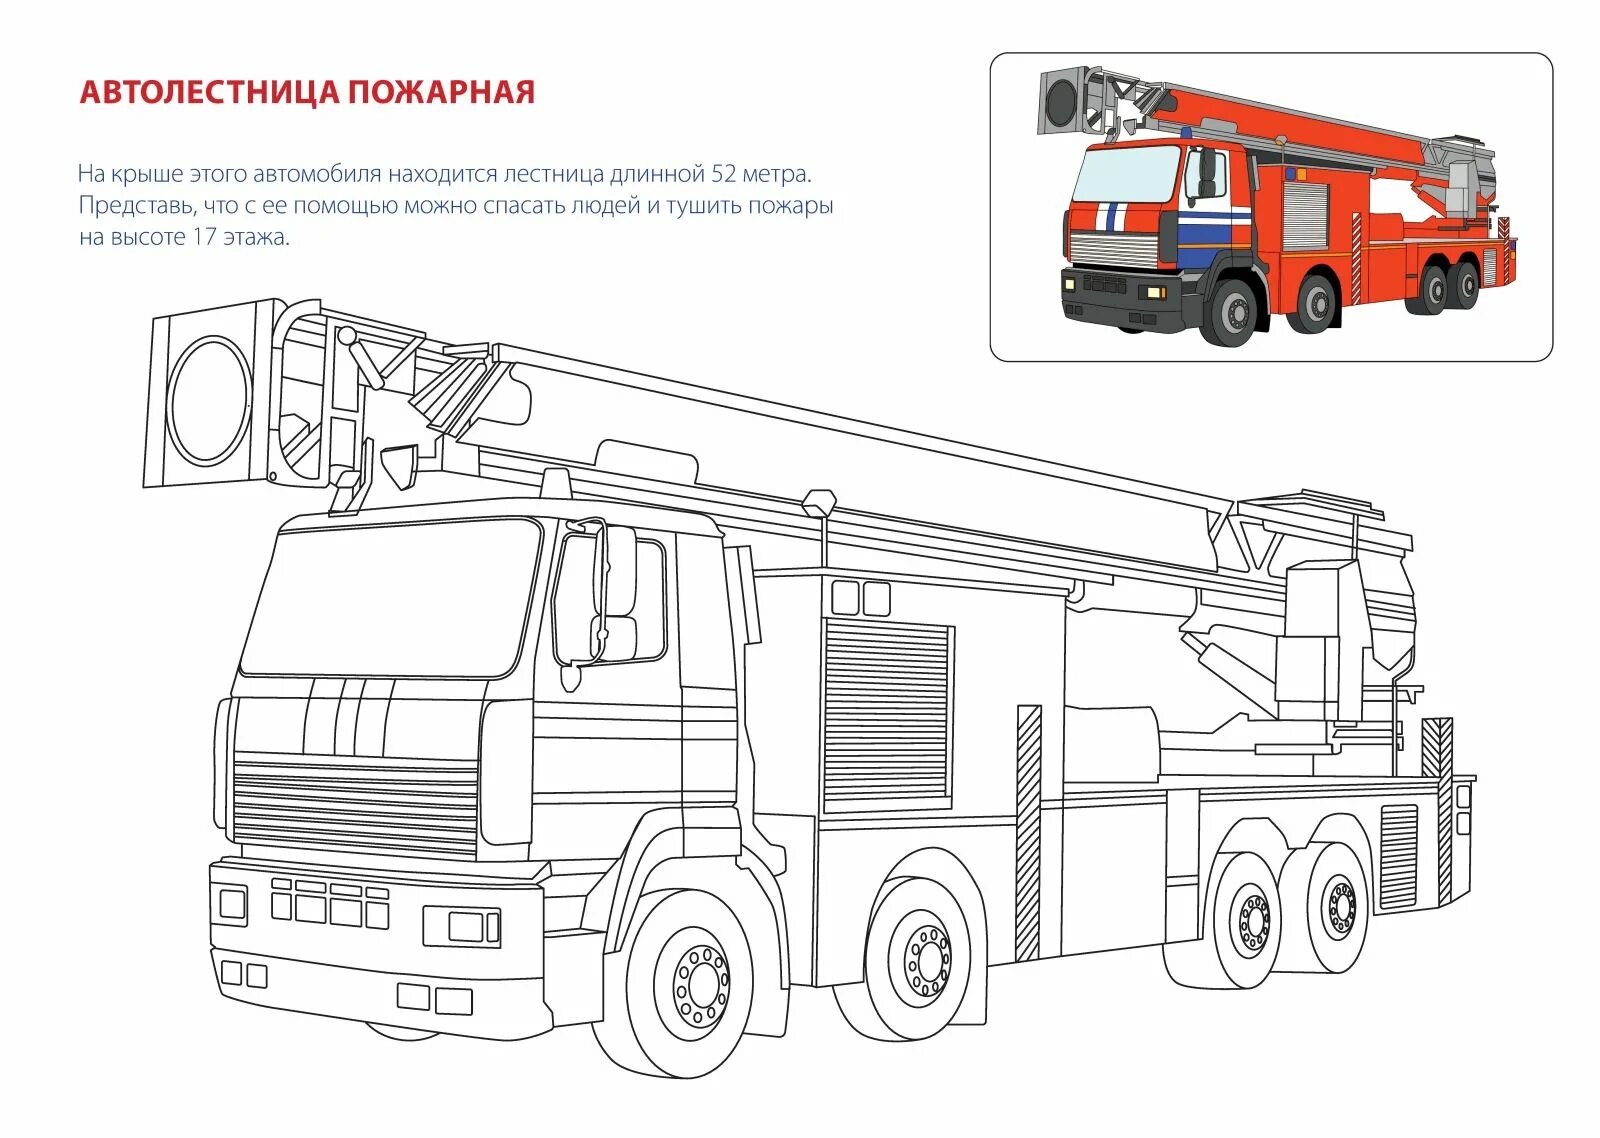 Exciting fire truck coloring book